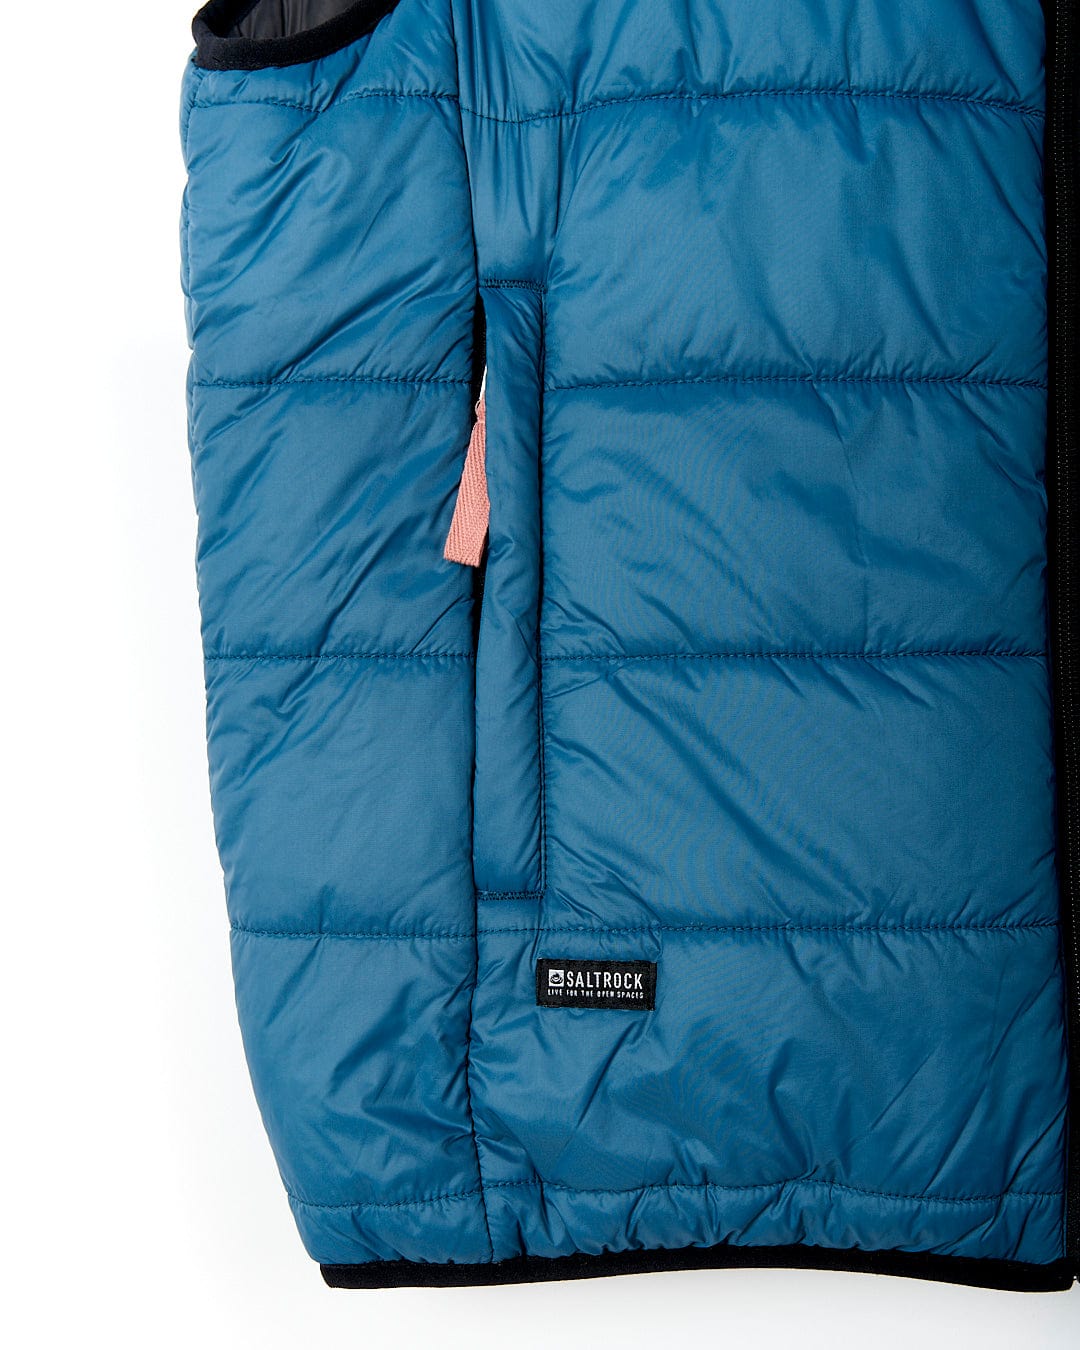 A Saltrock Ridleys - Womens Reversible Gilet - Blue, a water resistant blue puffy vest with a zippered pocket, perfect as a travel buddy.